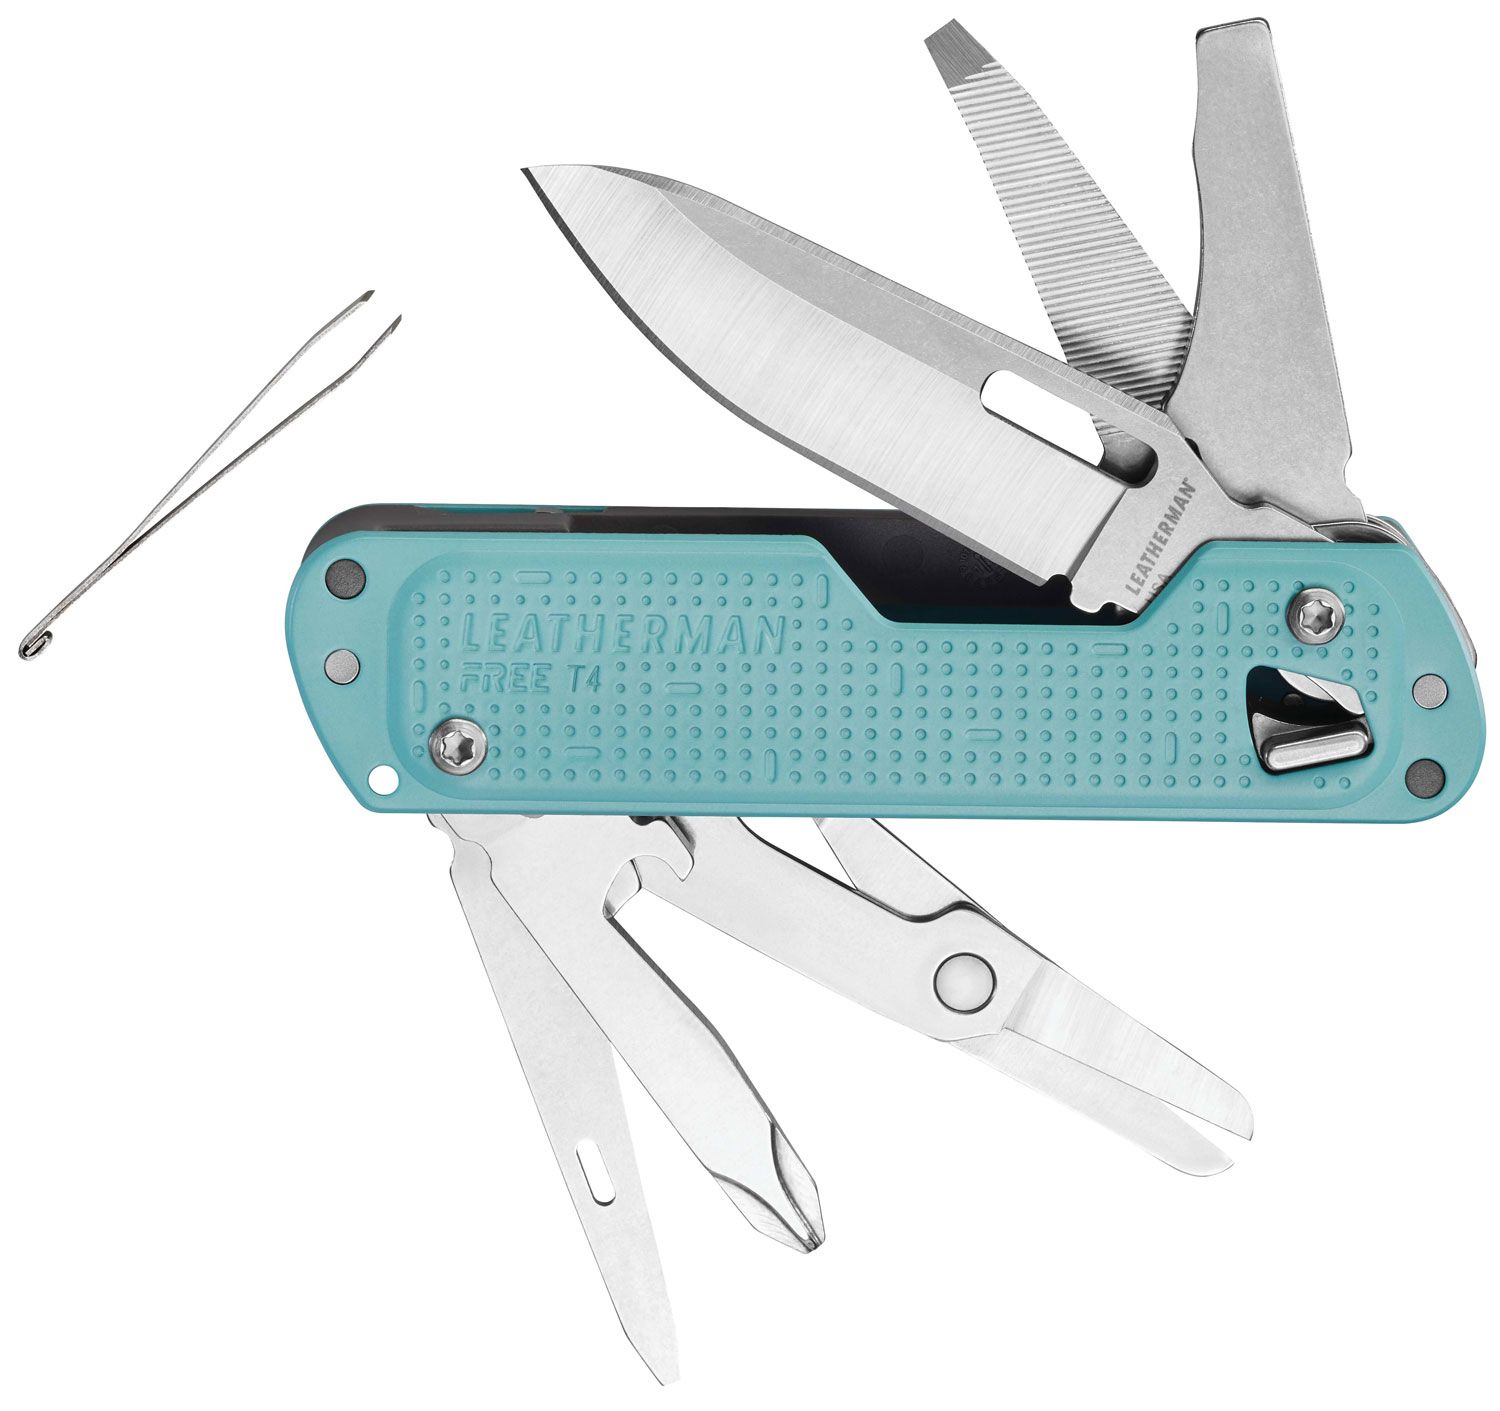 Leatherman FREE T2 Multi-Tool - Stainless Steel Pocket Size with